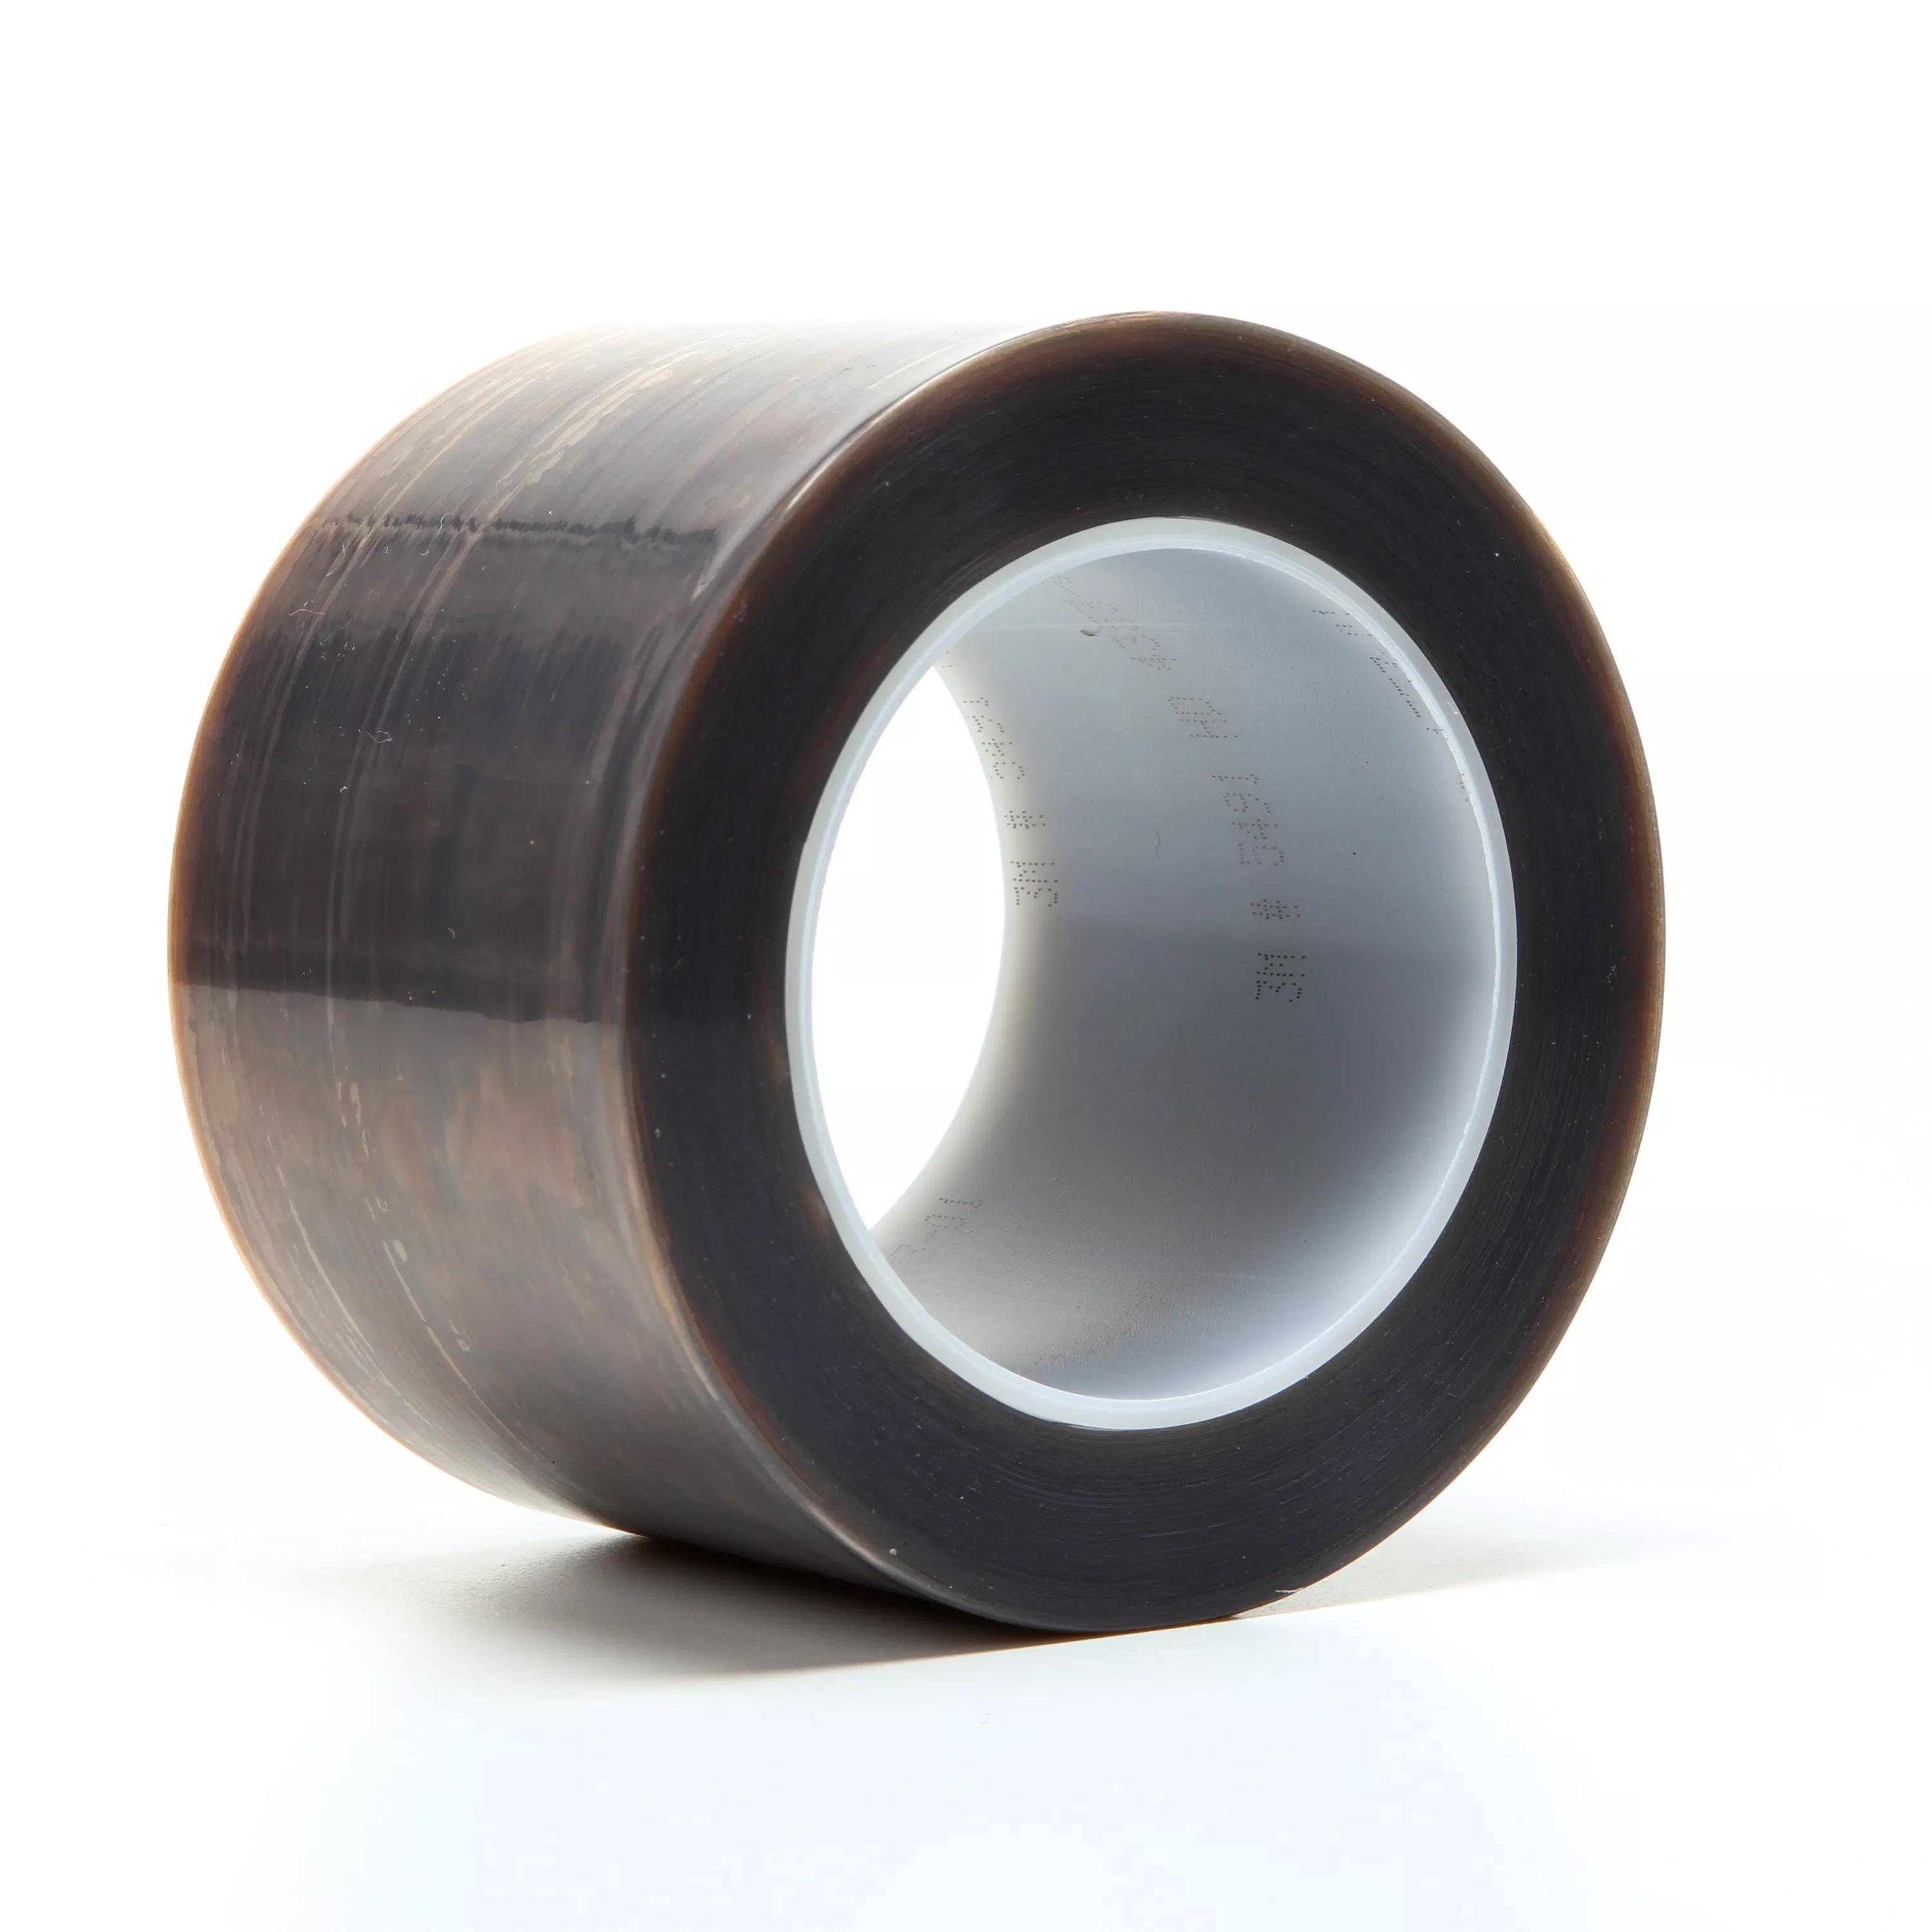 3M™ PTFE Film Tape 5491, Brown, 3 in x 36 yd, 6.7 mil, 3 Roll/Case